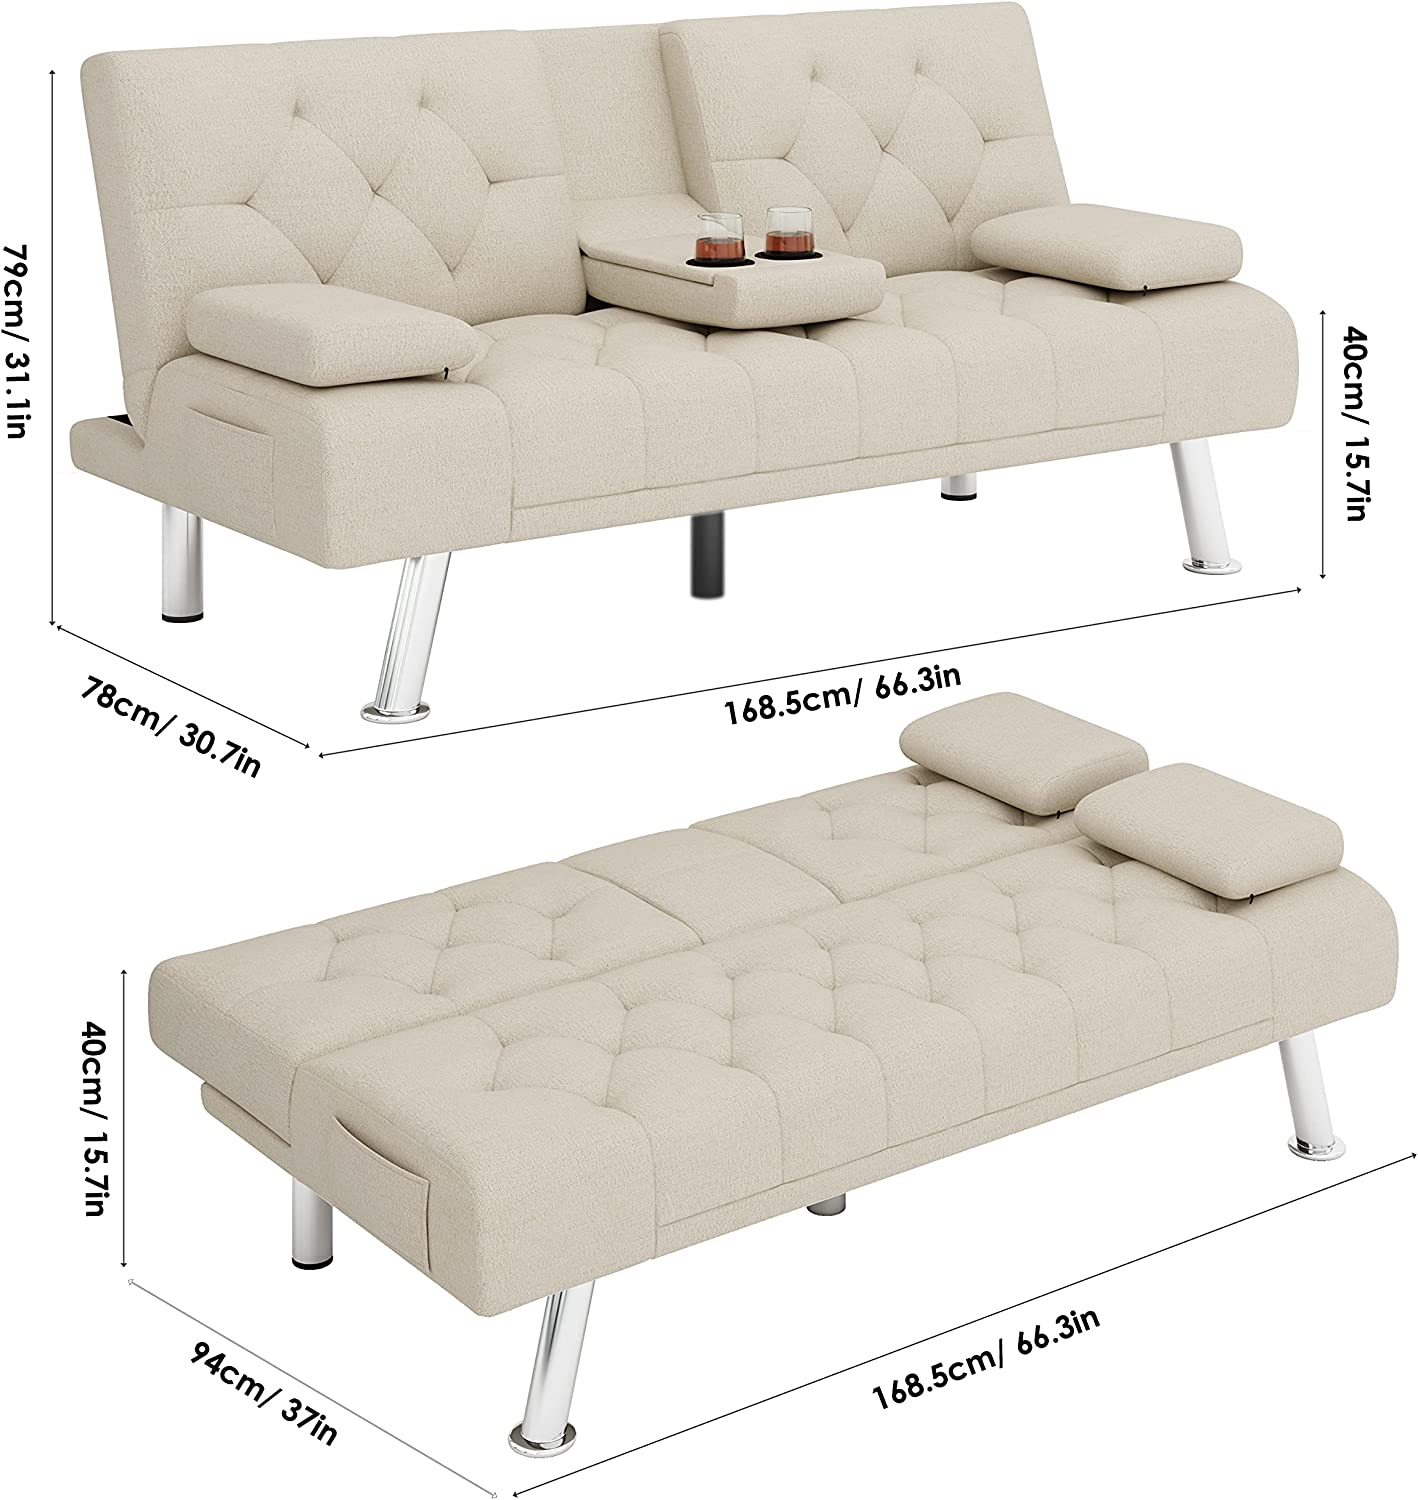 Homfa Upholstered Sofa Bed Couch, Convertible Futon Sleeper Sofa with Removable Armrests and 2 Cup Holders, Cream White - image 2 of 8